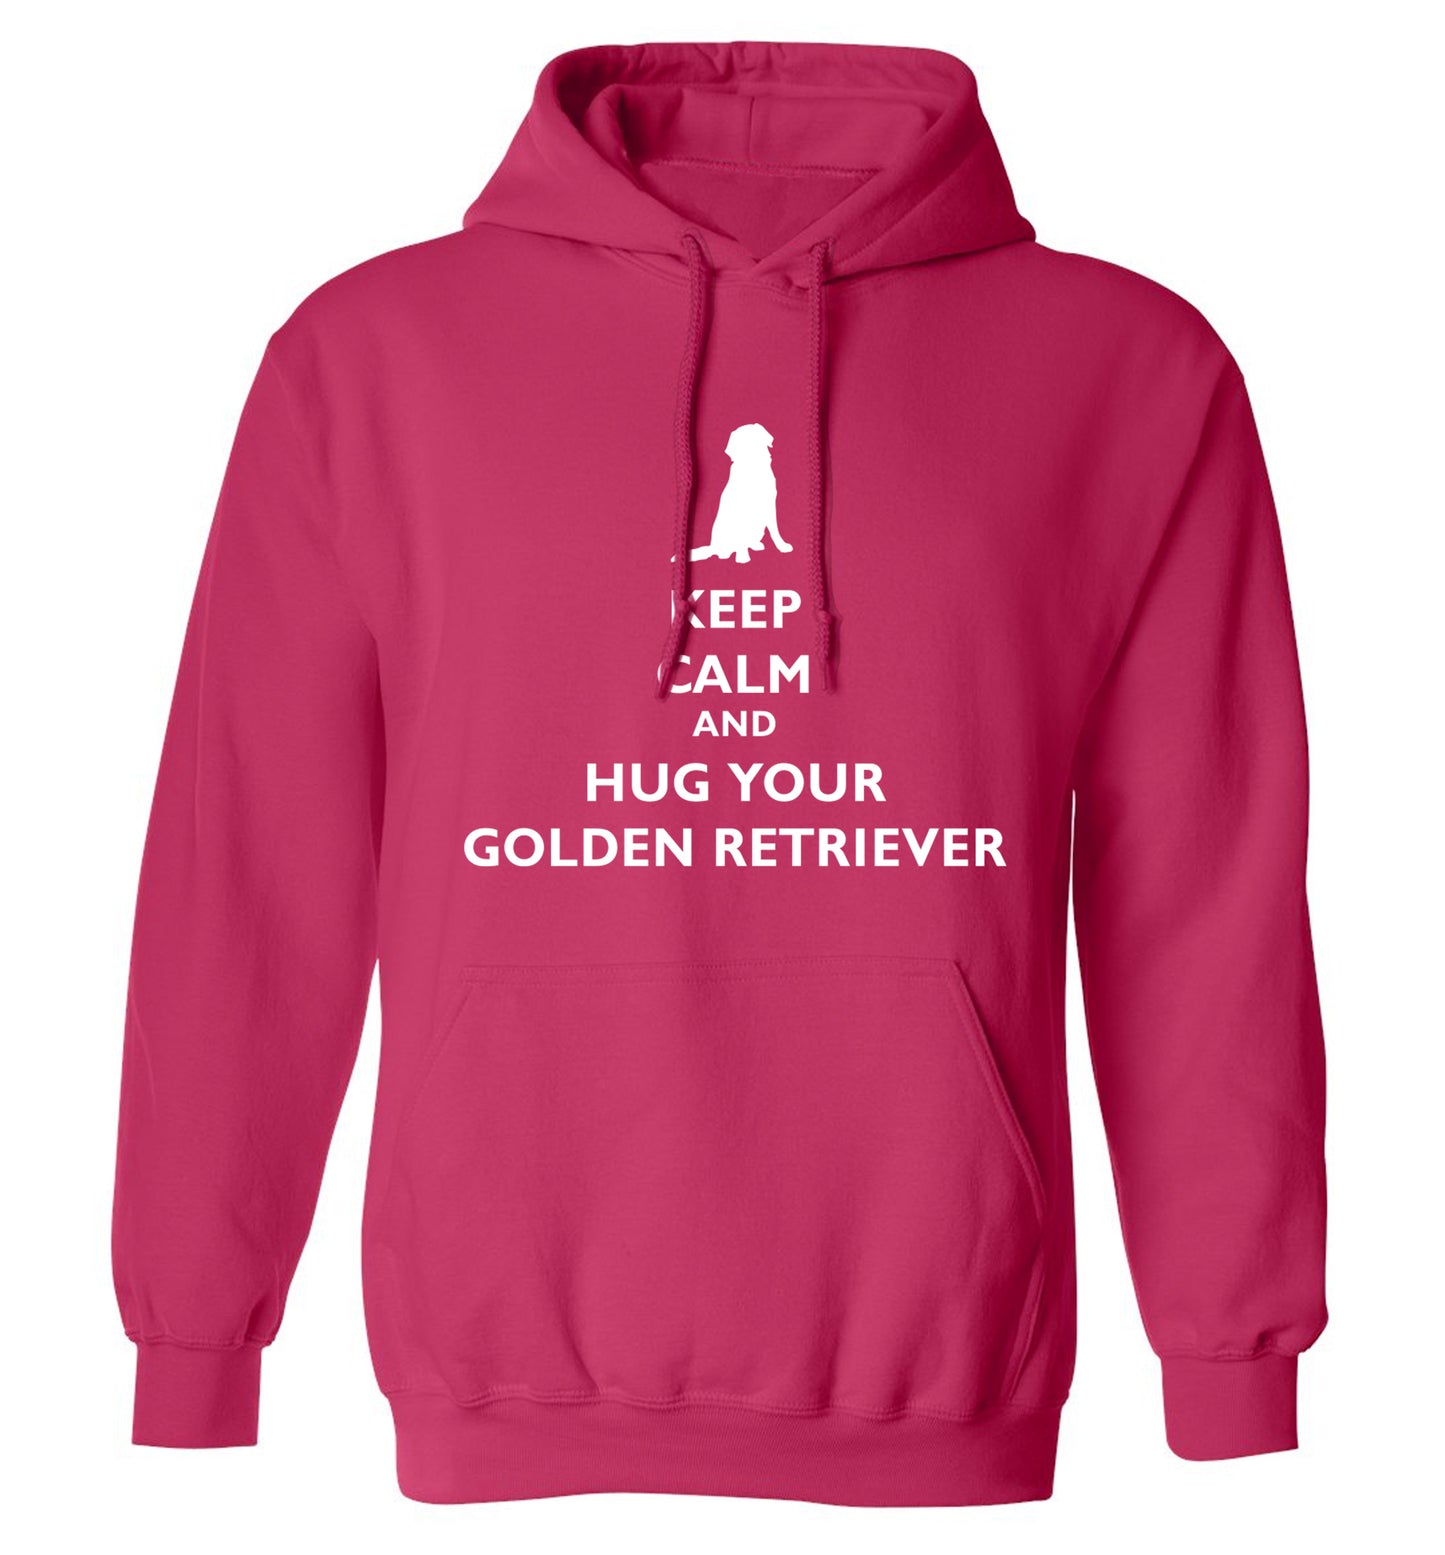 Keep calm and hug your golden retriever adults unisex pink hoodie 2XL